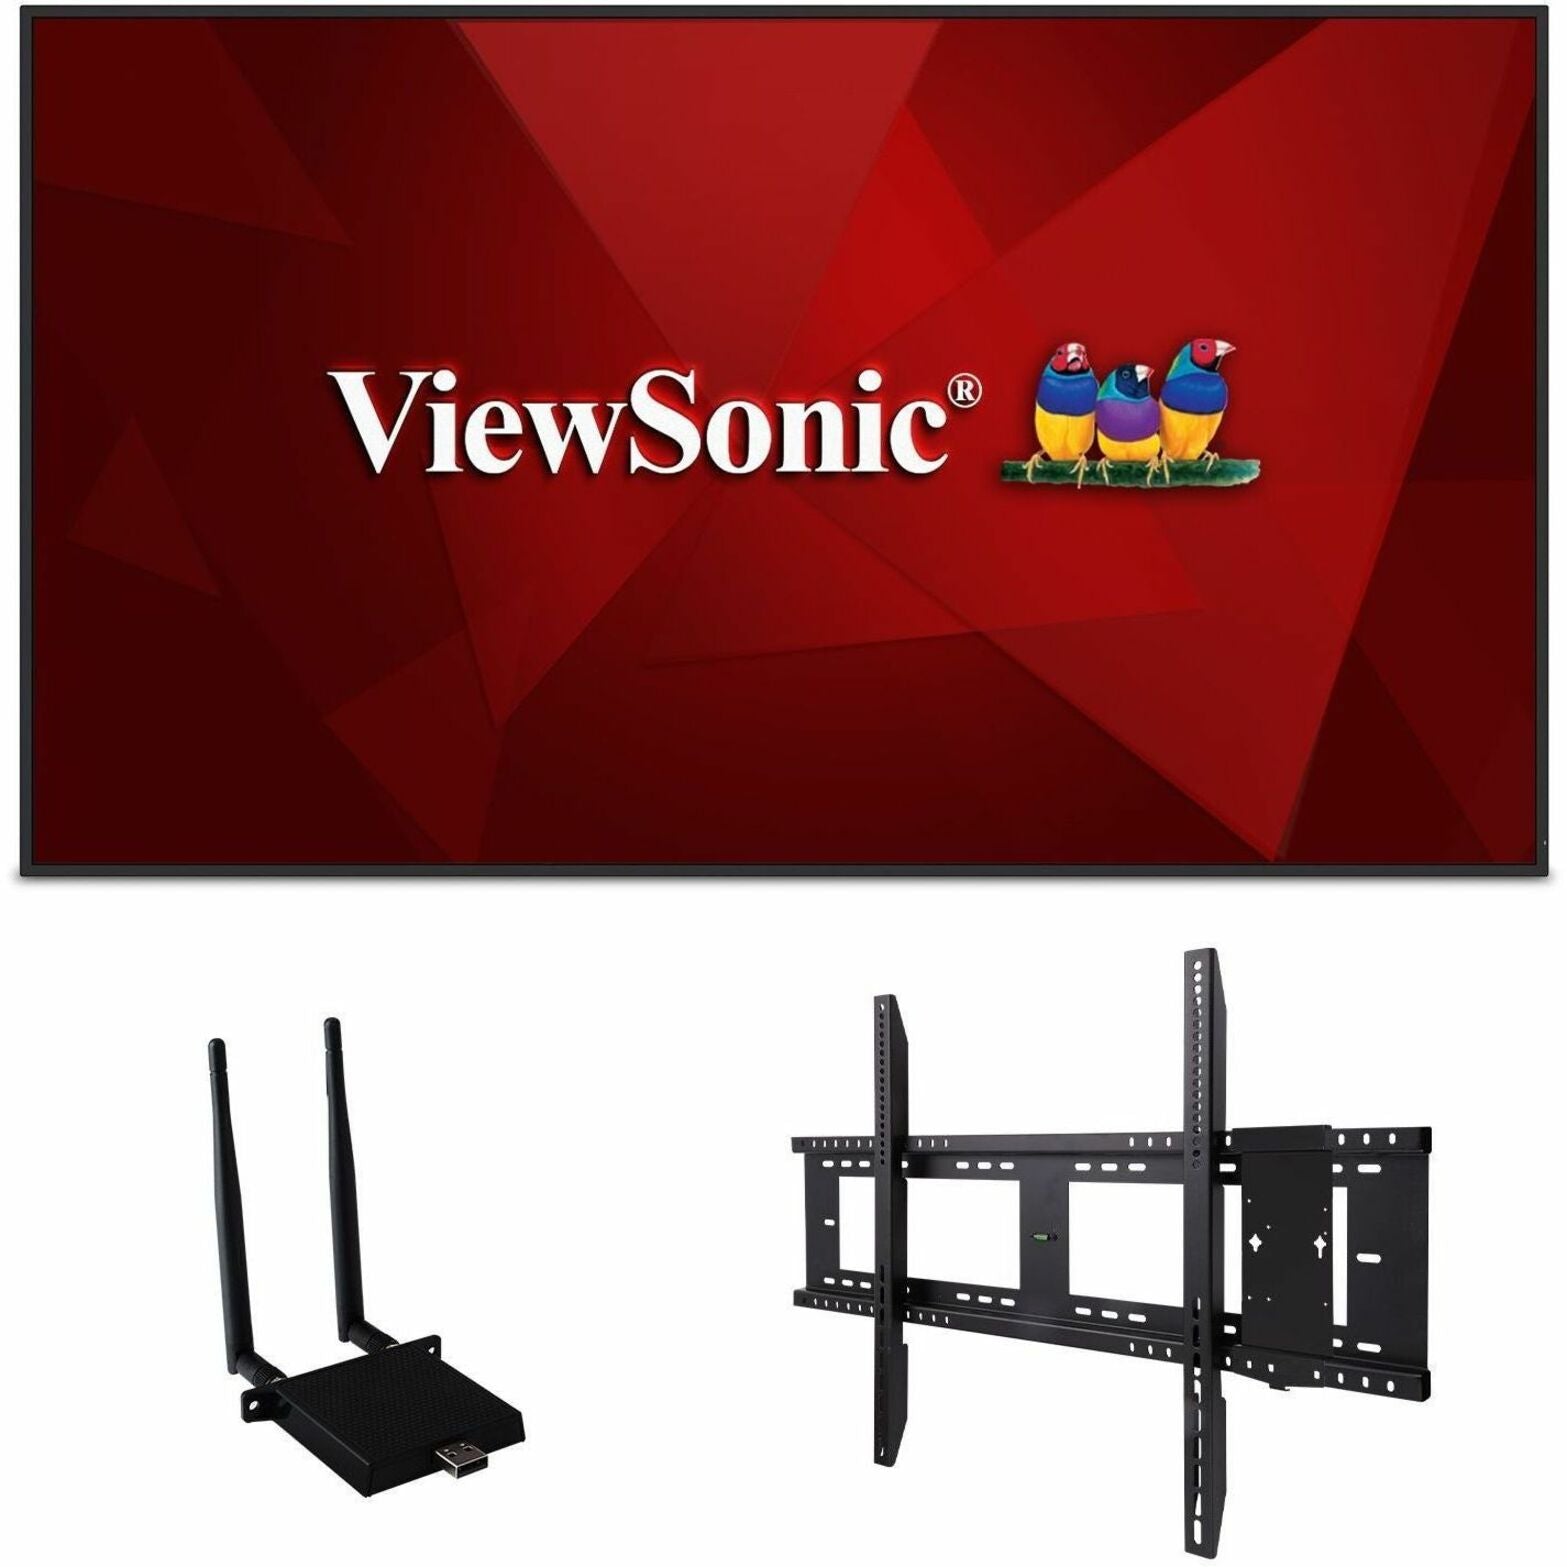 ViewSonic CDE5530-E1 Digital Signage Display, 4K, Integrated Software, WiFi Adapter and Fixed Wall Mount